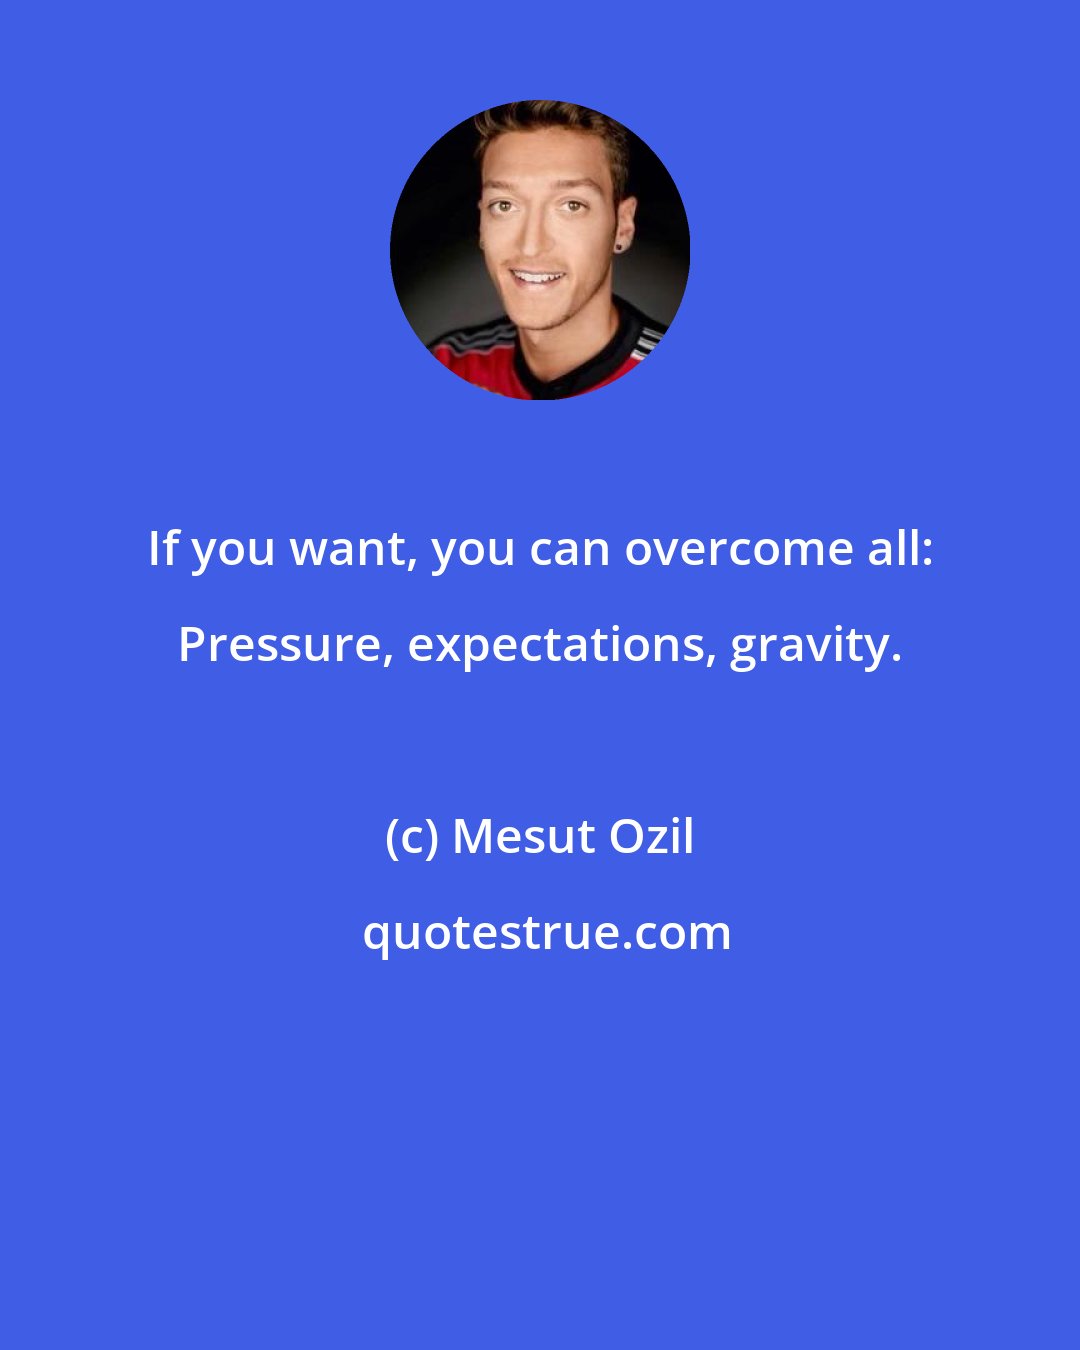 Mesut Ozil: If you want, you can overcome all: Pressure, expectations, gravity.